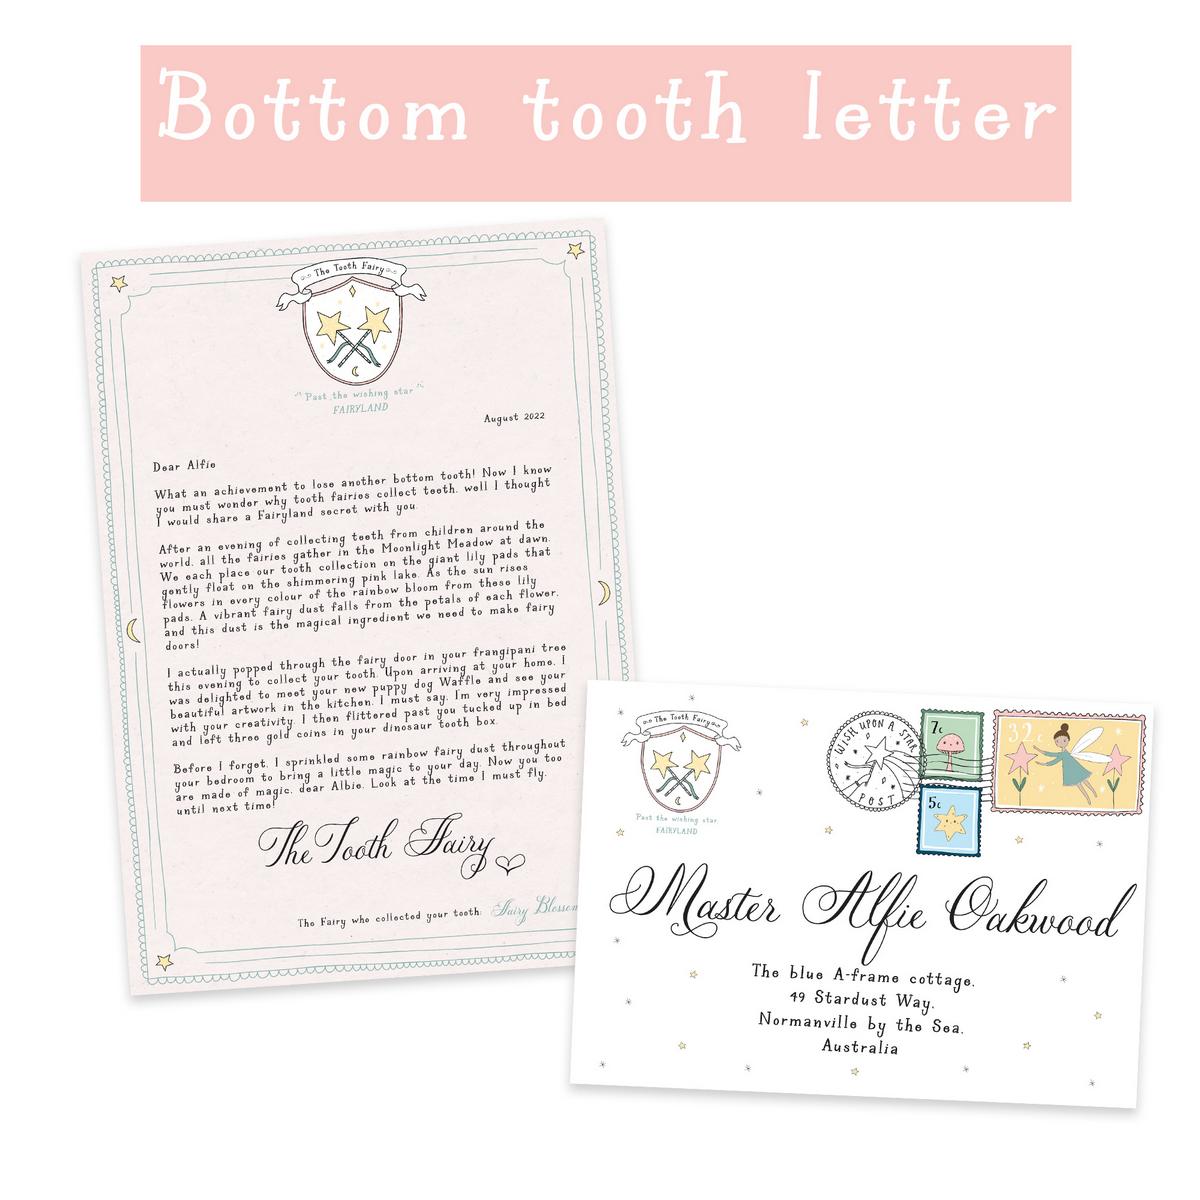 The Tooth Fairy - their next personalised letter